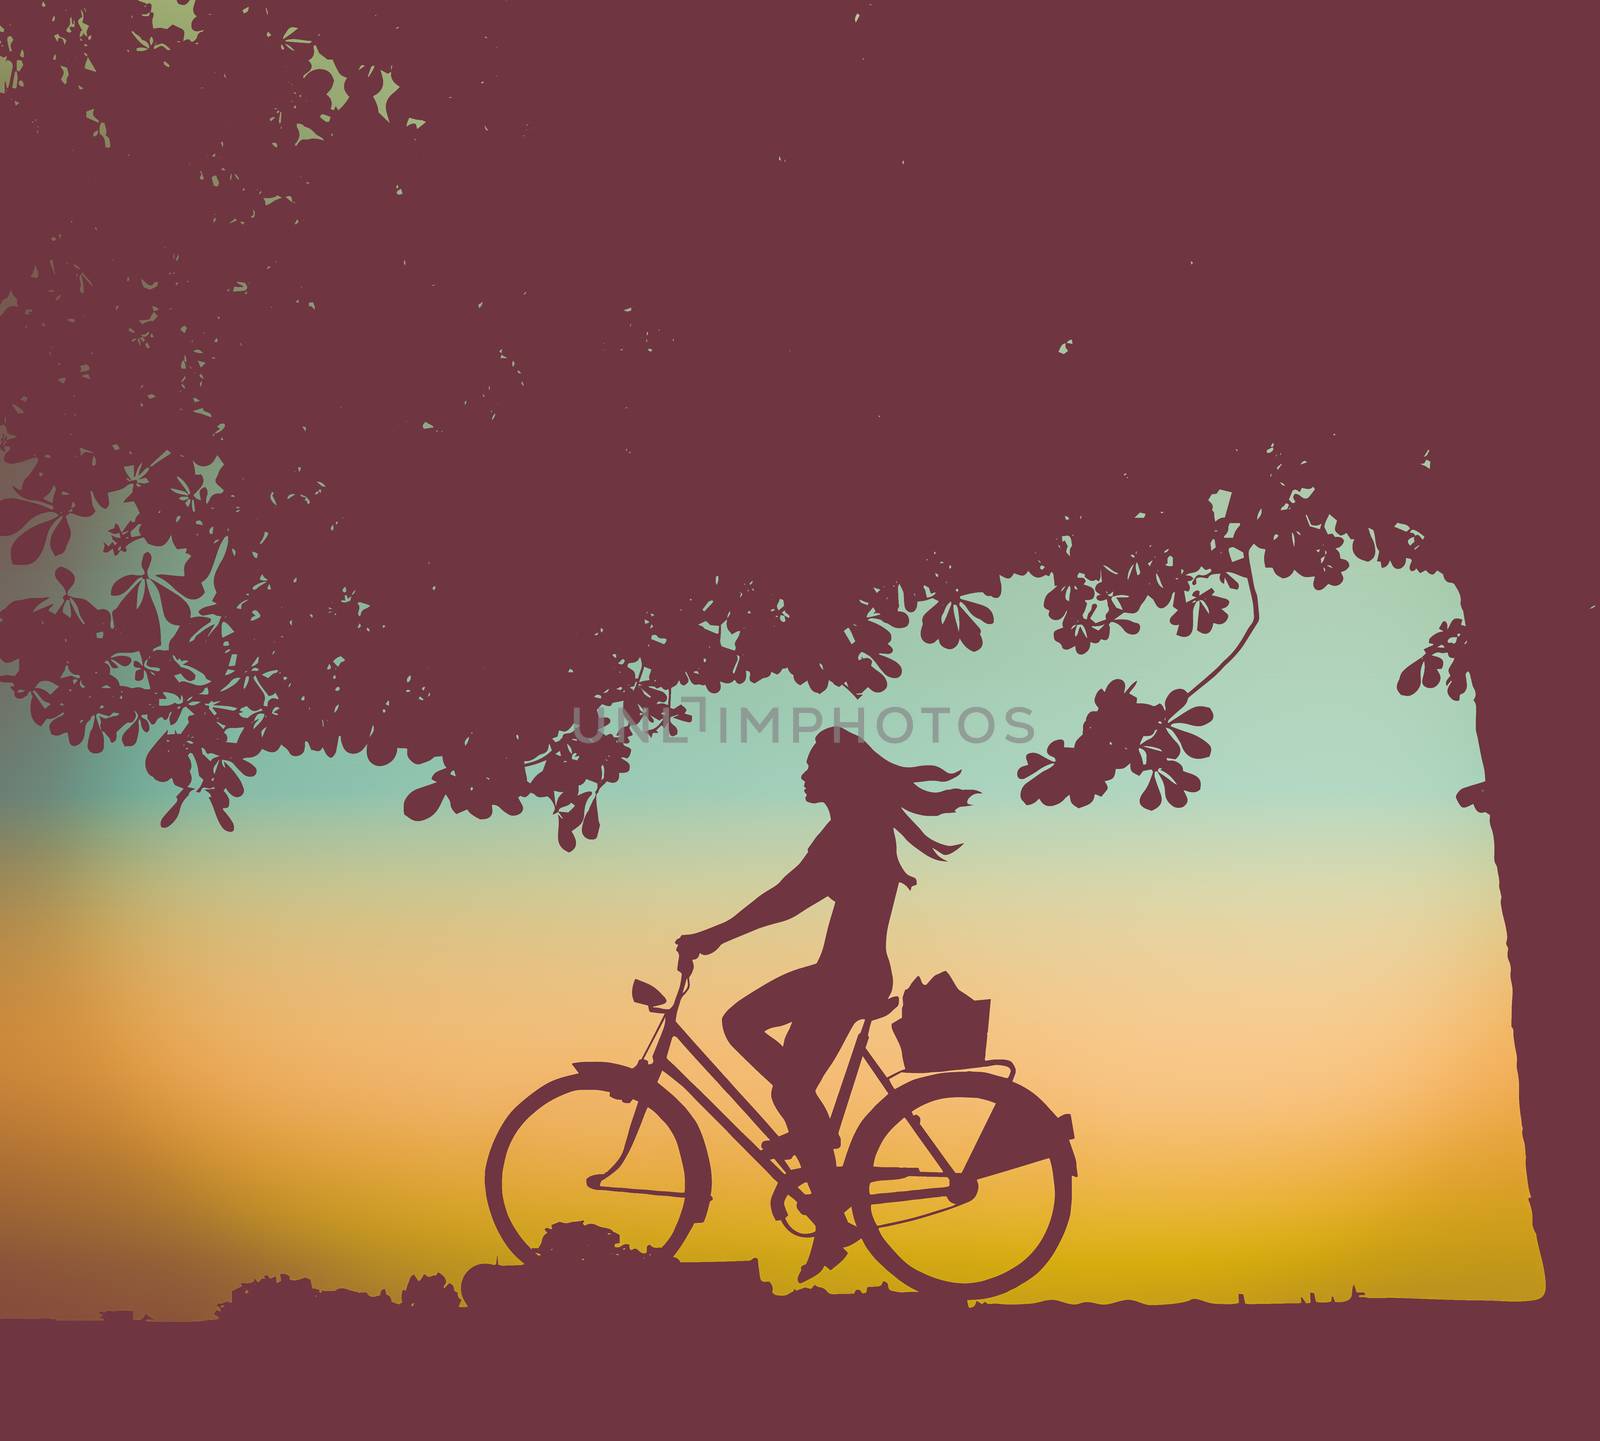 Retro Style Illustration Of A Girl Or Woman Riding A Bike Under A Tree At Sunset